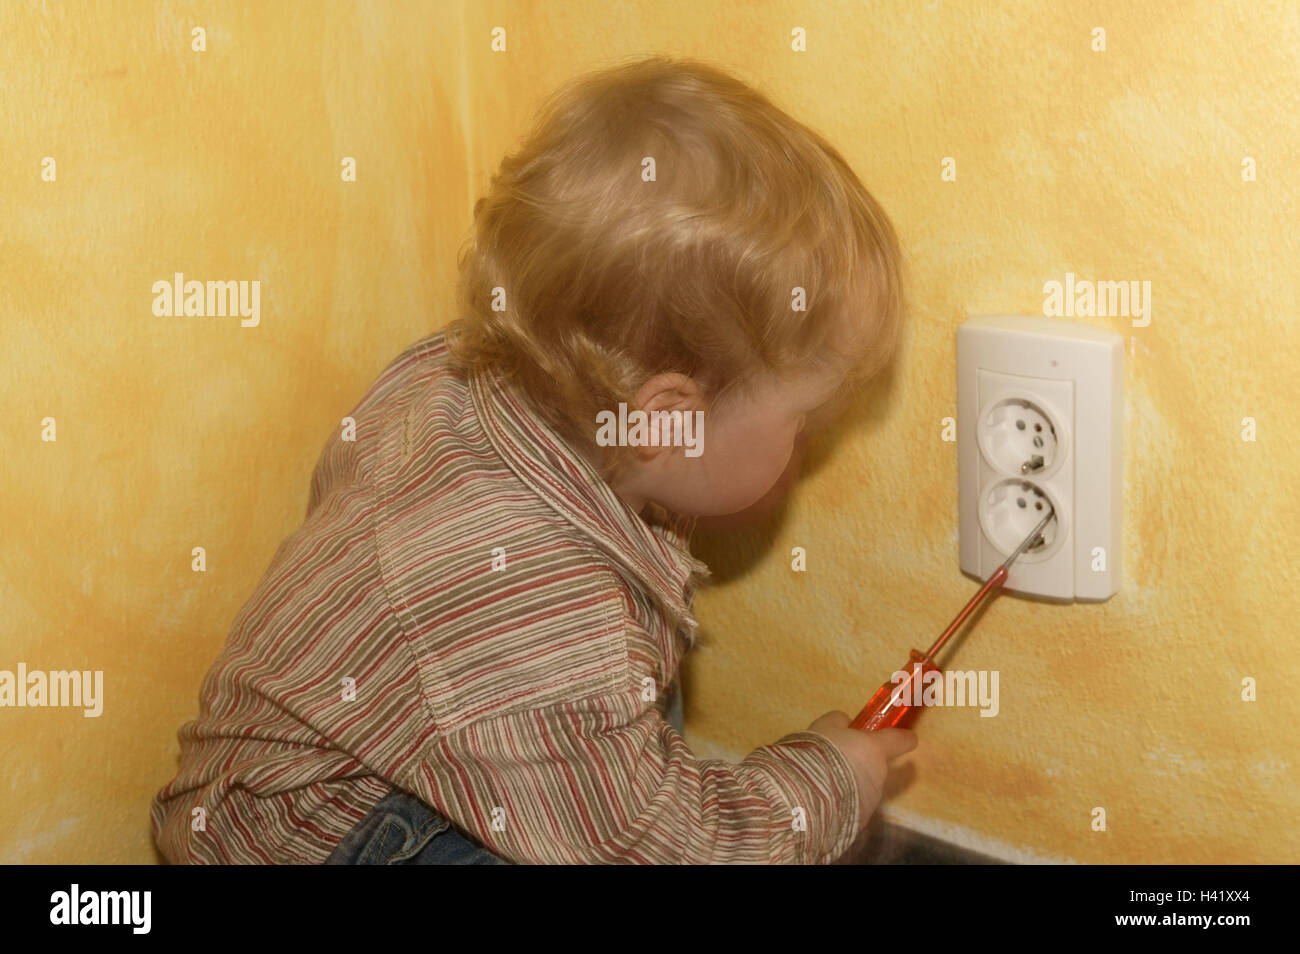 Infant, play, socket, screwdriver, mortal danger danger, accident, danger collision, tools, current, shunt, activity, experiment, electric shock, backup, care, household, obligatory supervision, unattended, child, boy, 1 - 2 years, floor, sit, inside, chi Stock Photo